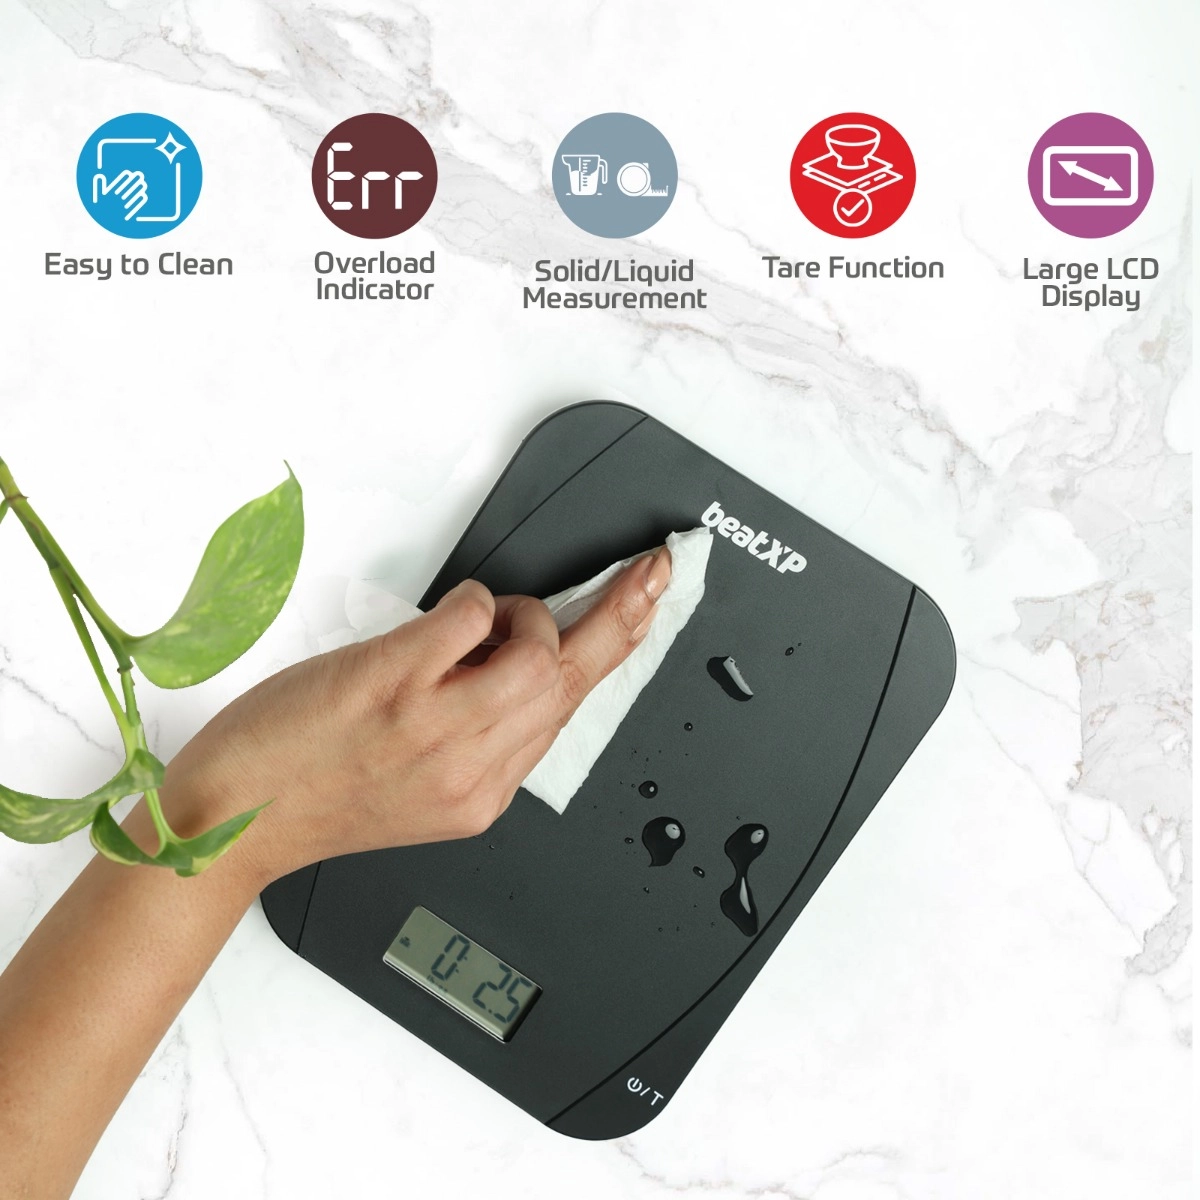 beatXP NeoChef Multipurpose Digital Weight Machine for Home Kitchen, Specifications